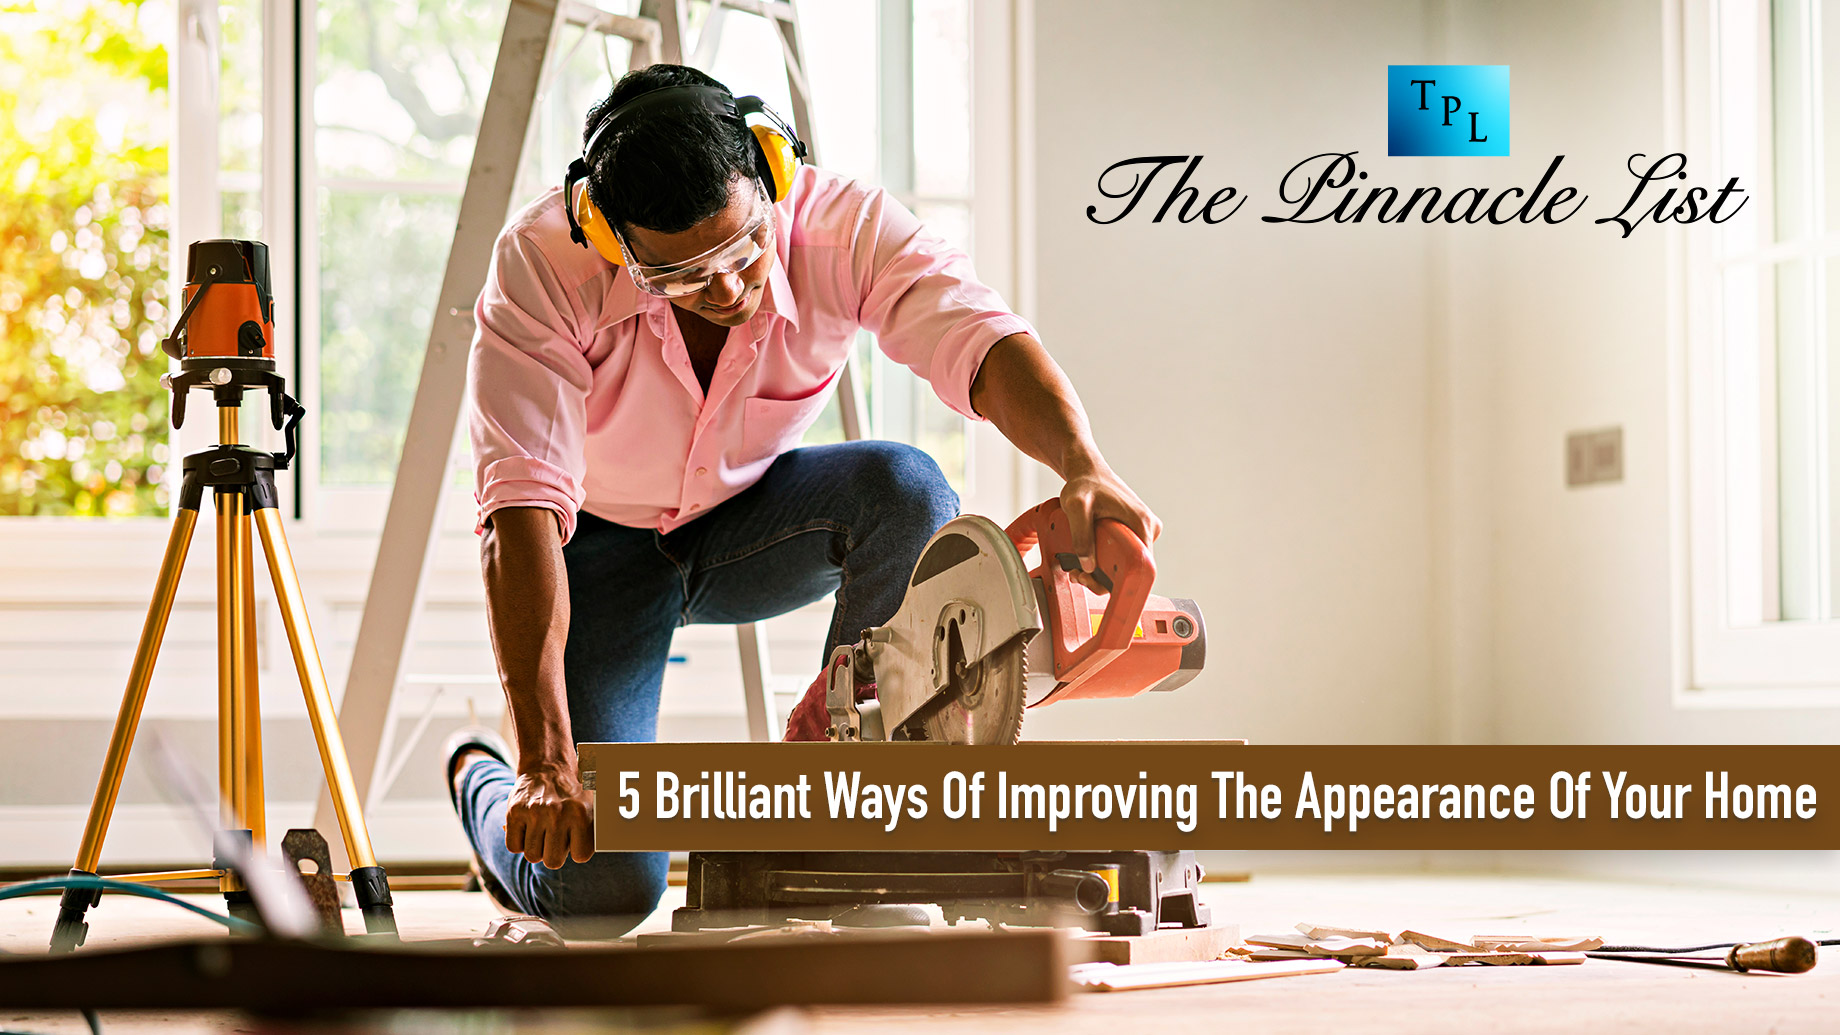 5 Brilliant Ways Of Improving The Appearance Of Your Home